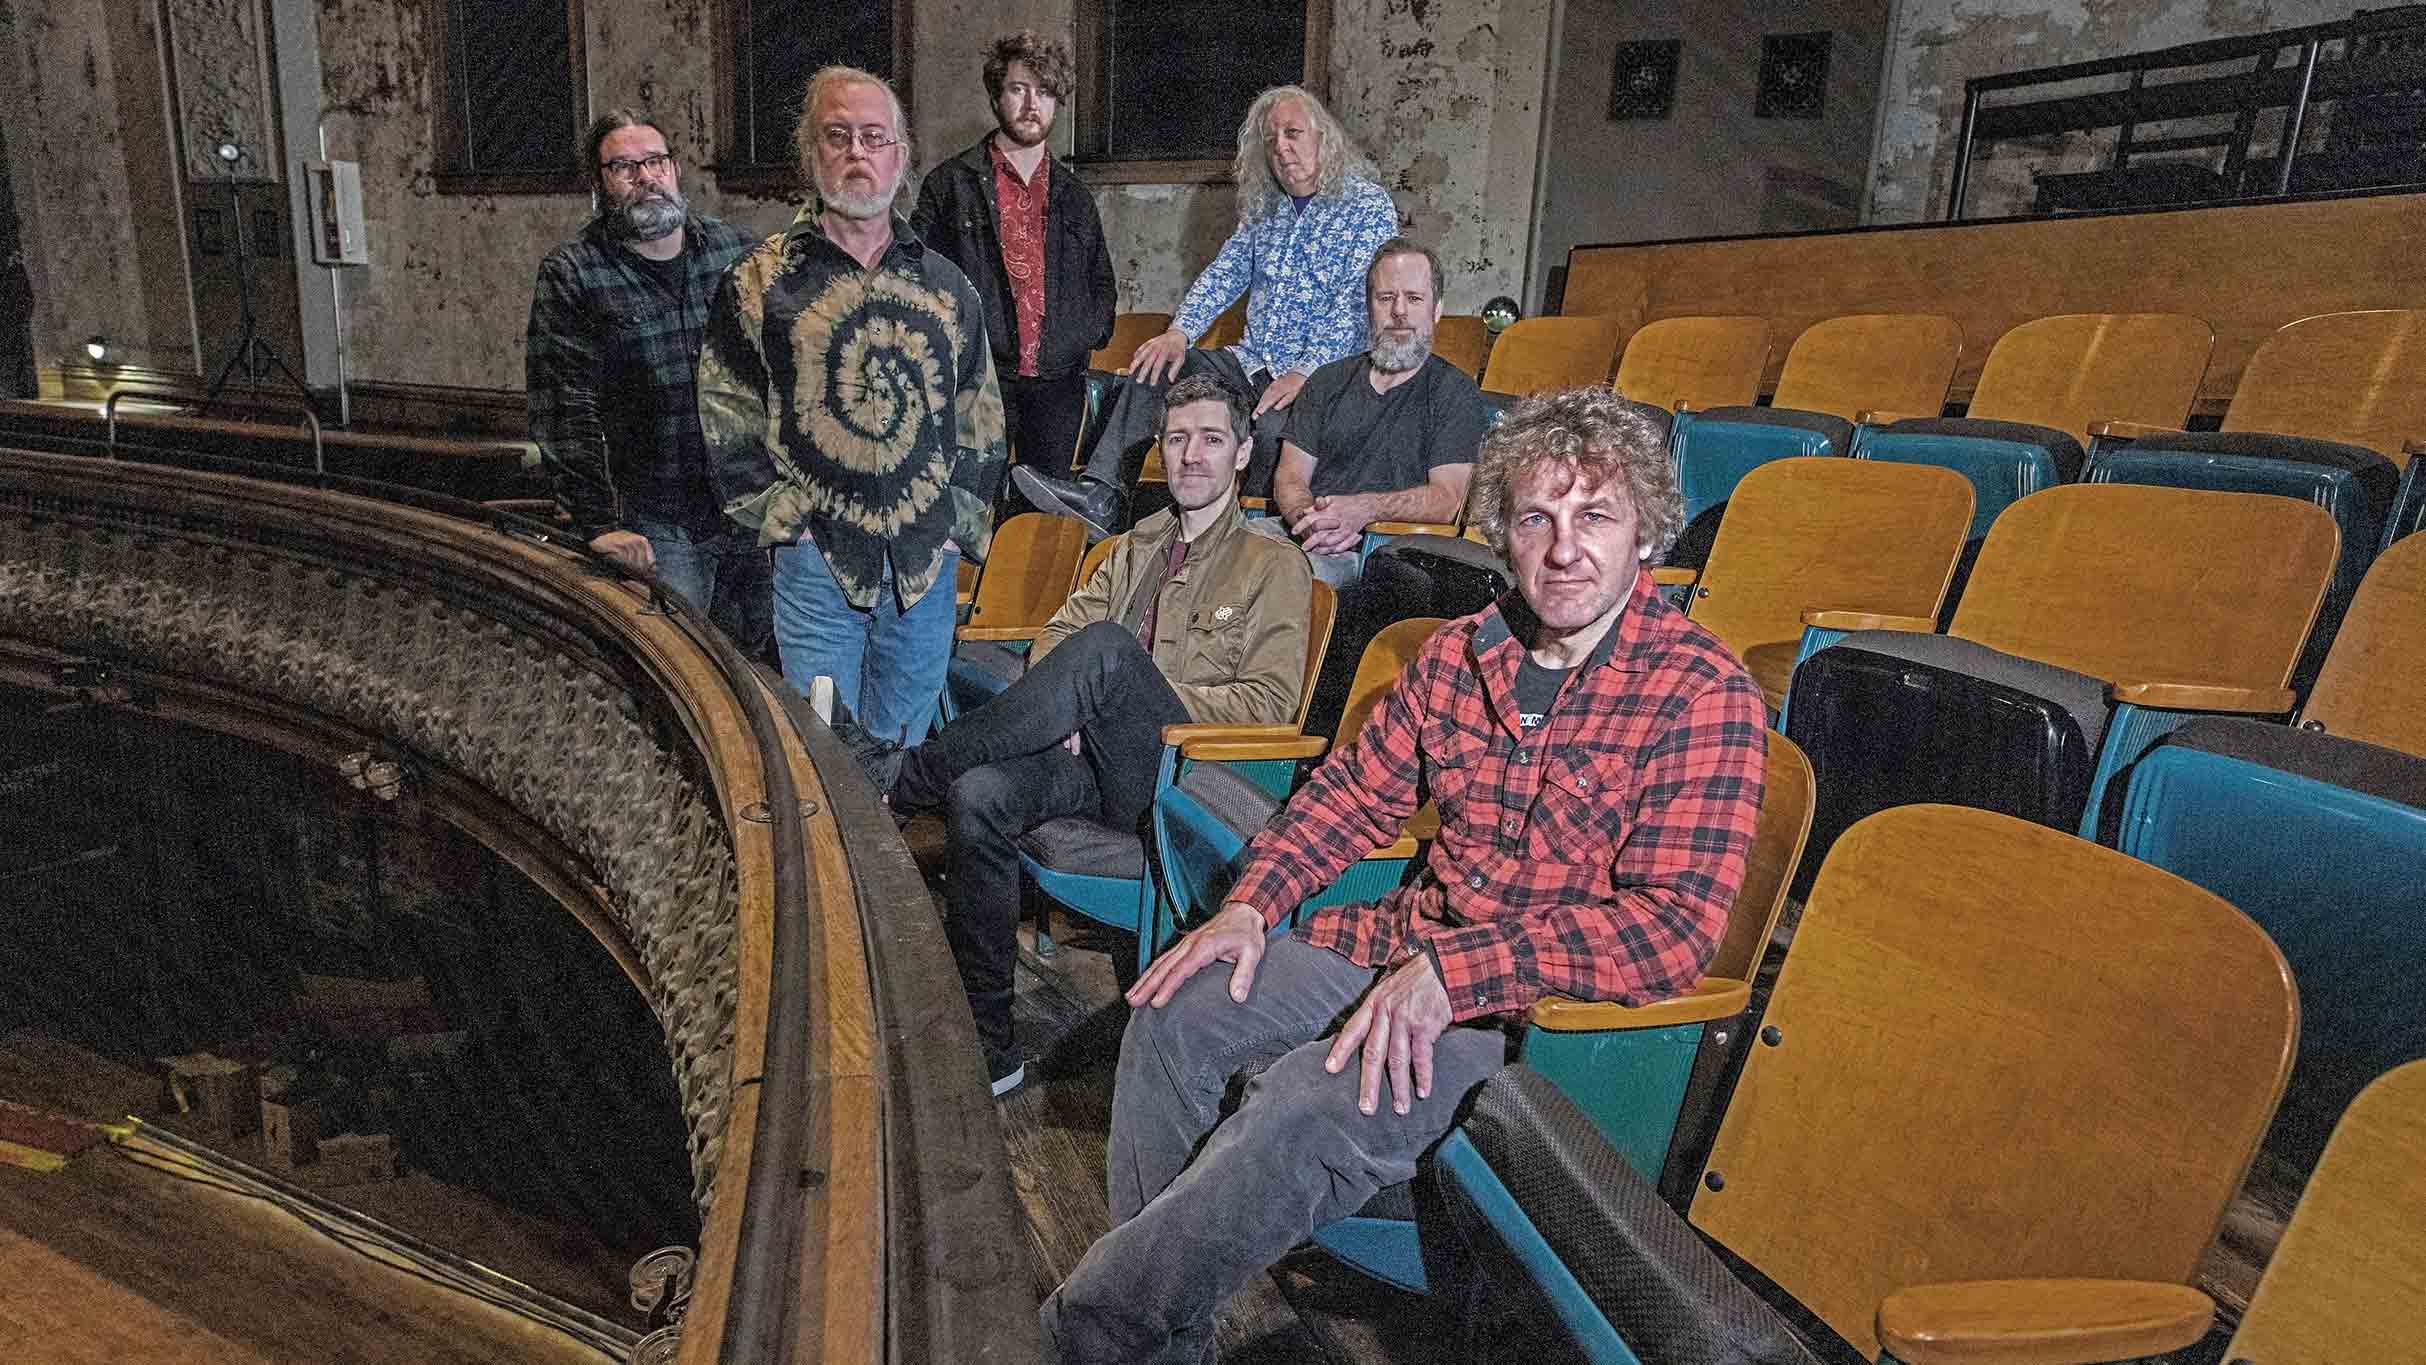 Yonder Mountain String Band, Railroad Earth, & Leftover Salmon